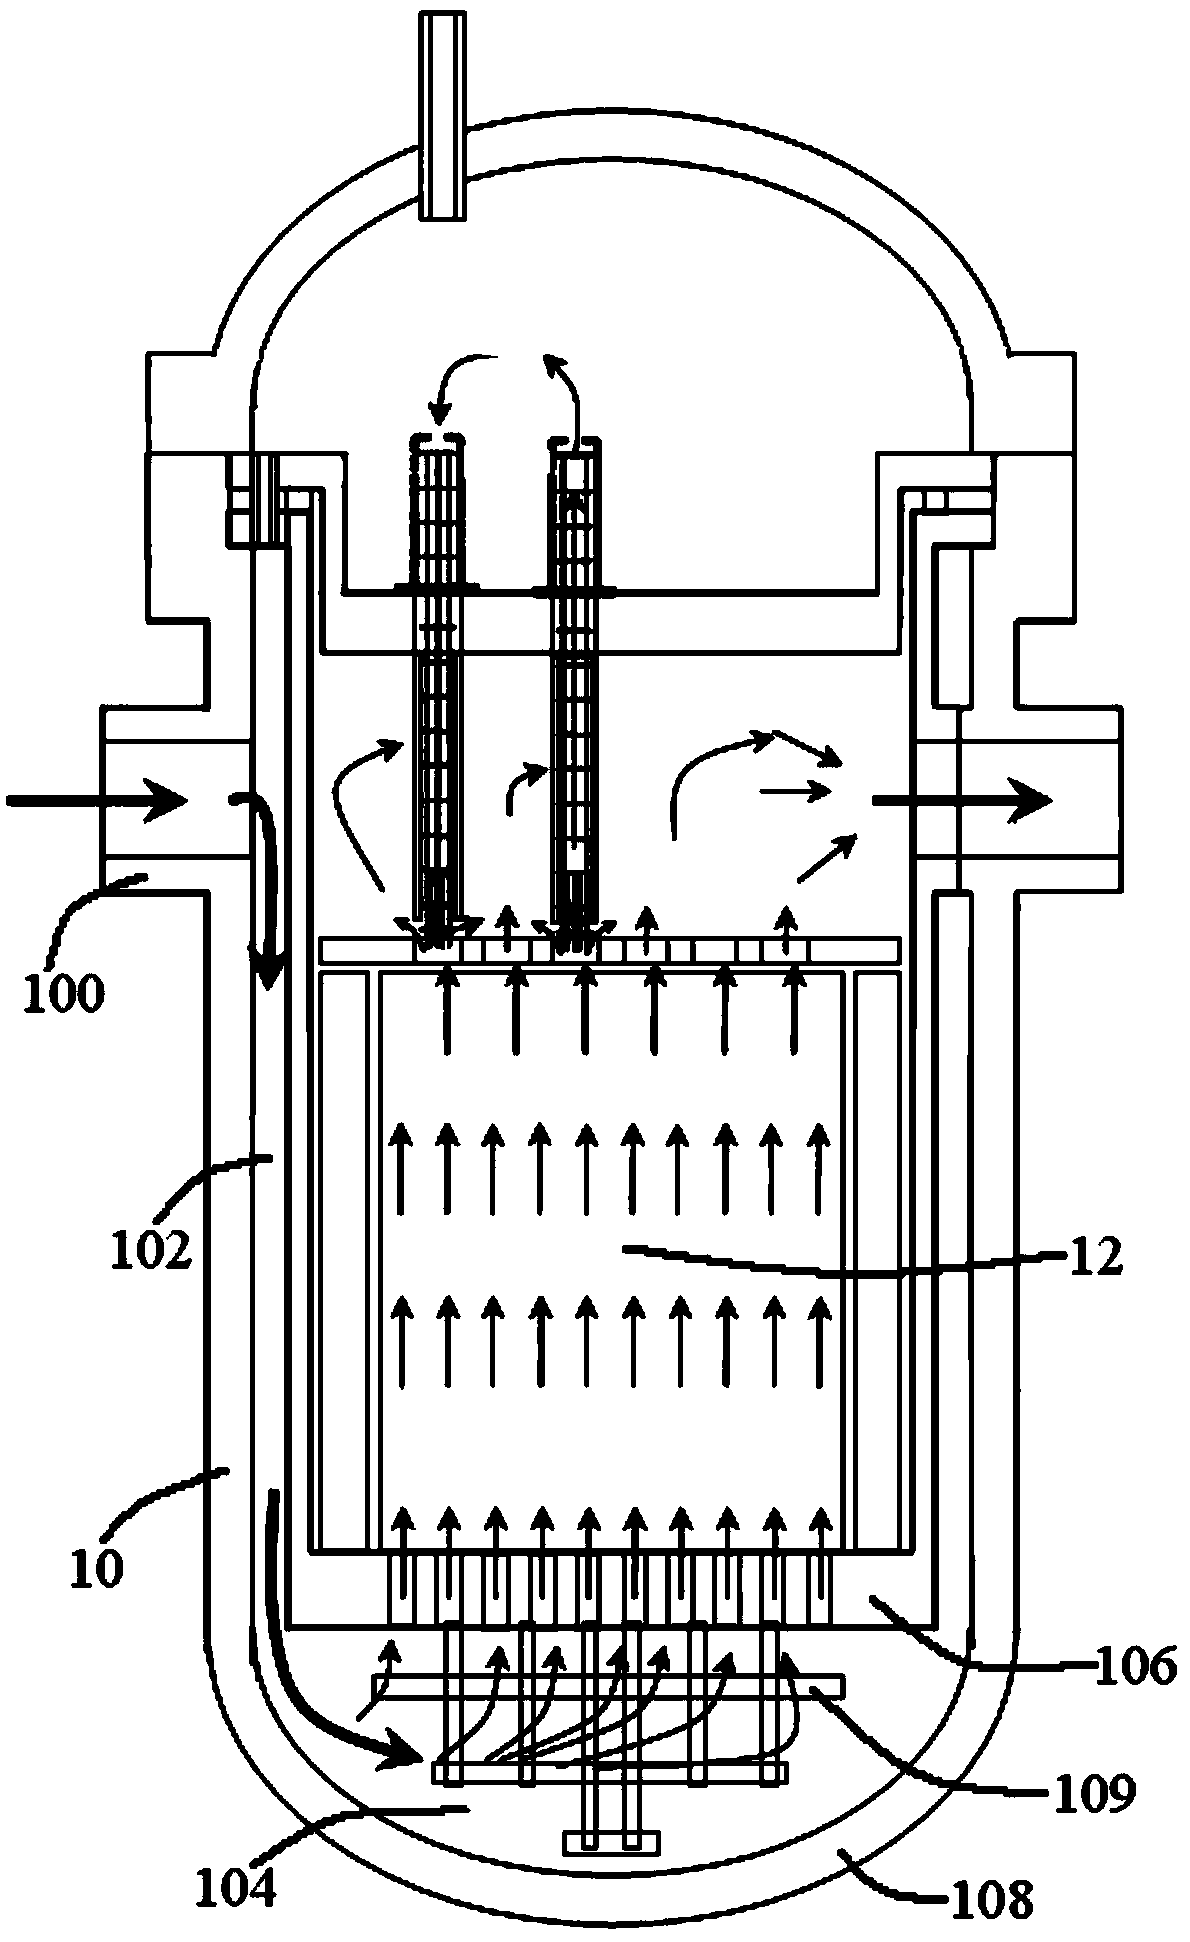 In-pile flow distribution device of reactor of nuclear power station